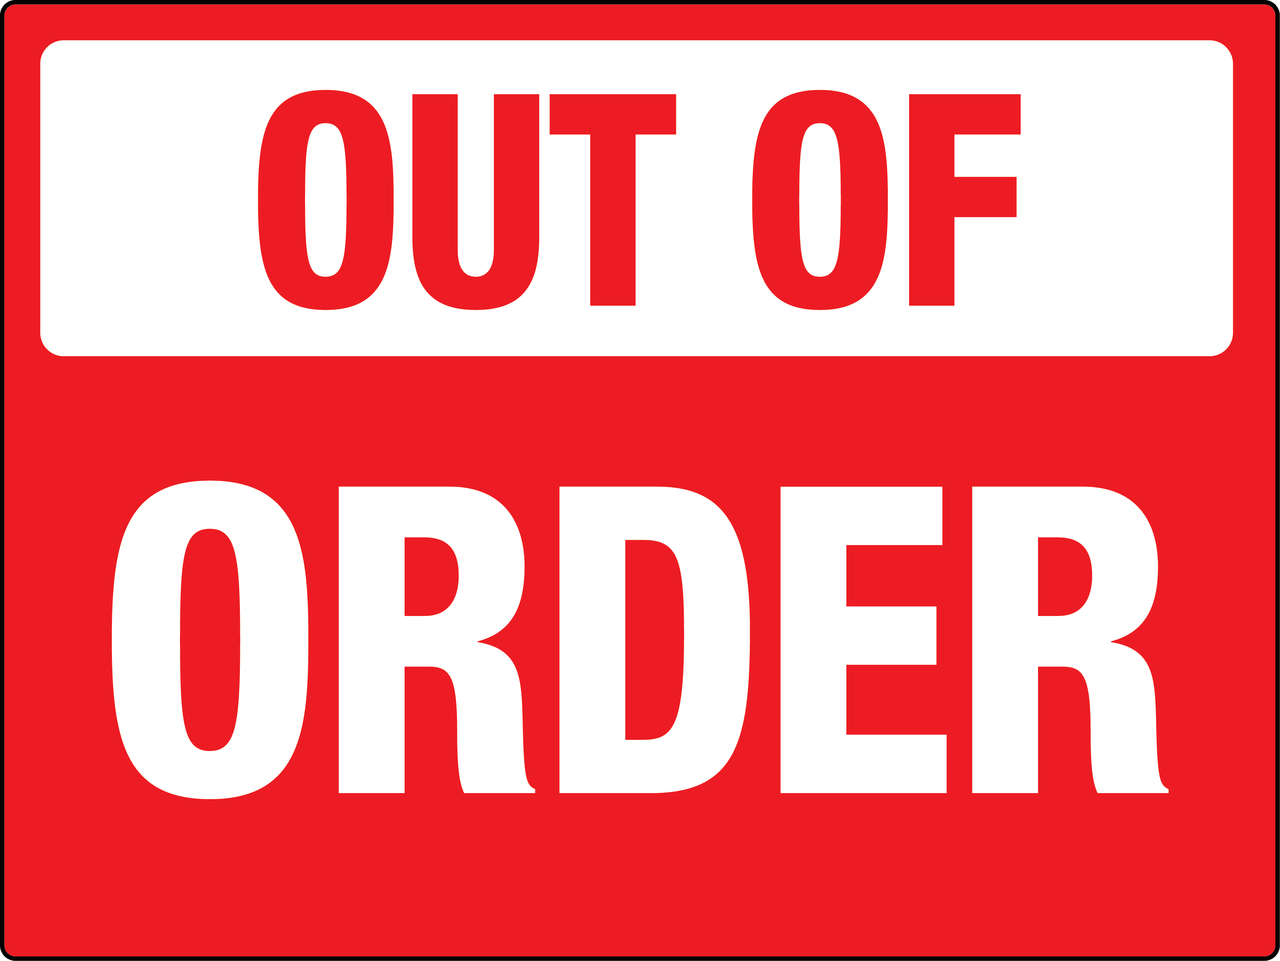 order and out